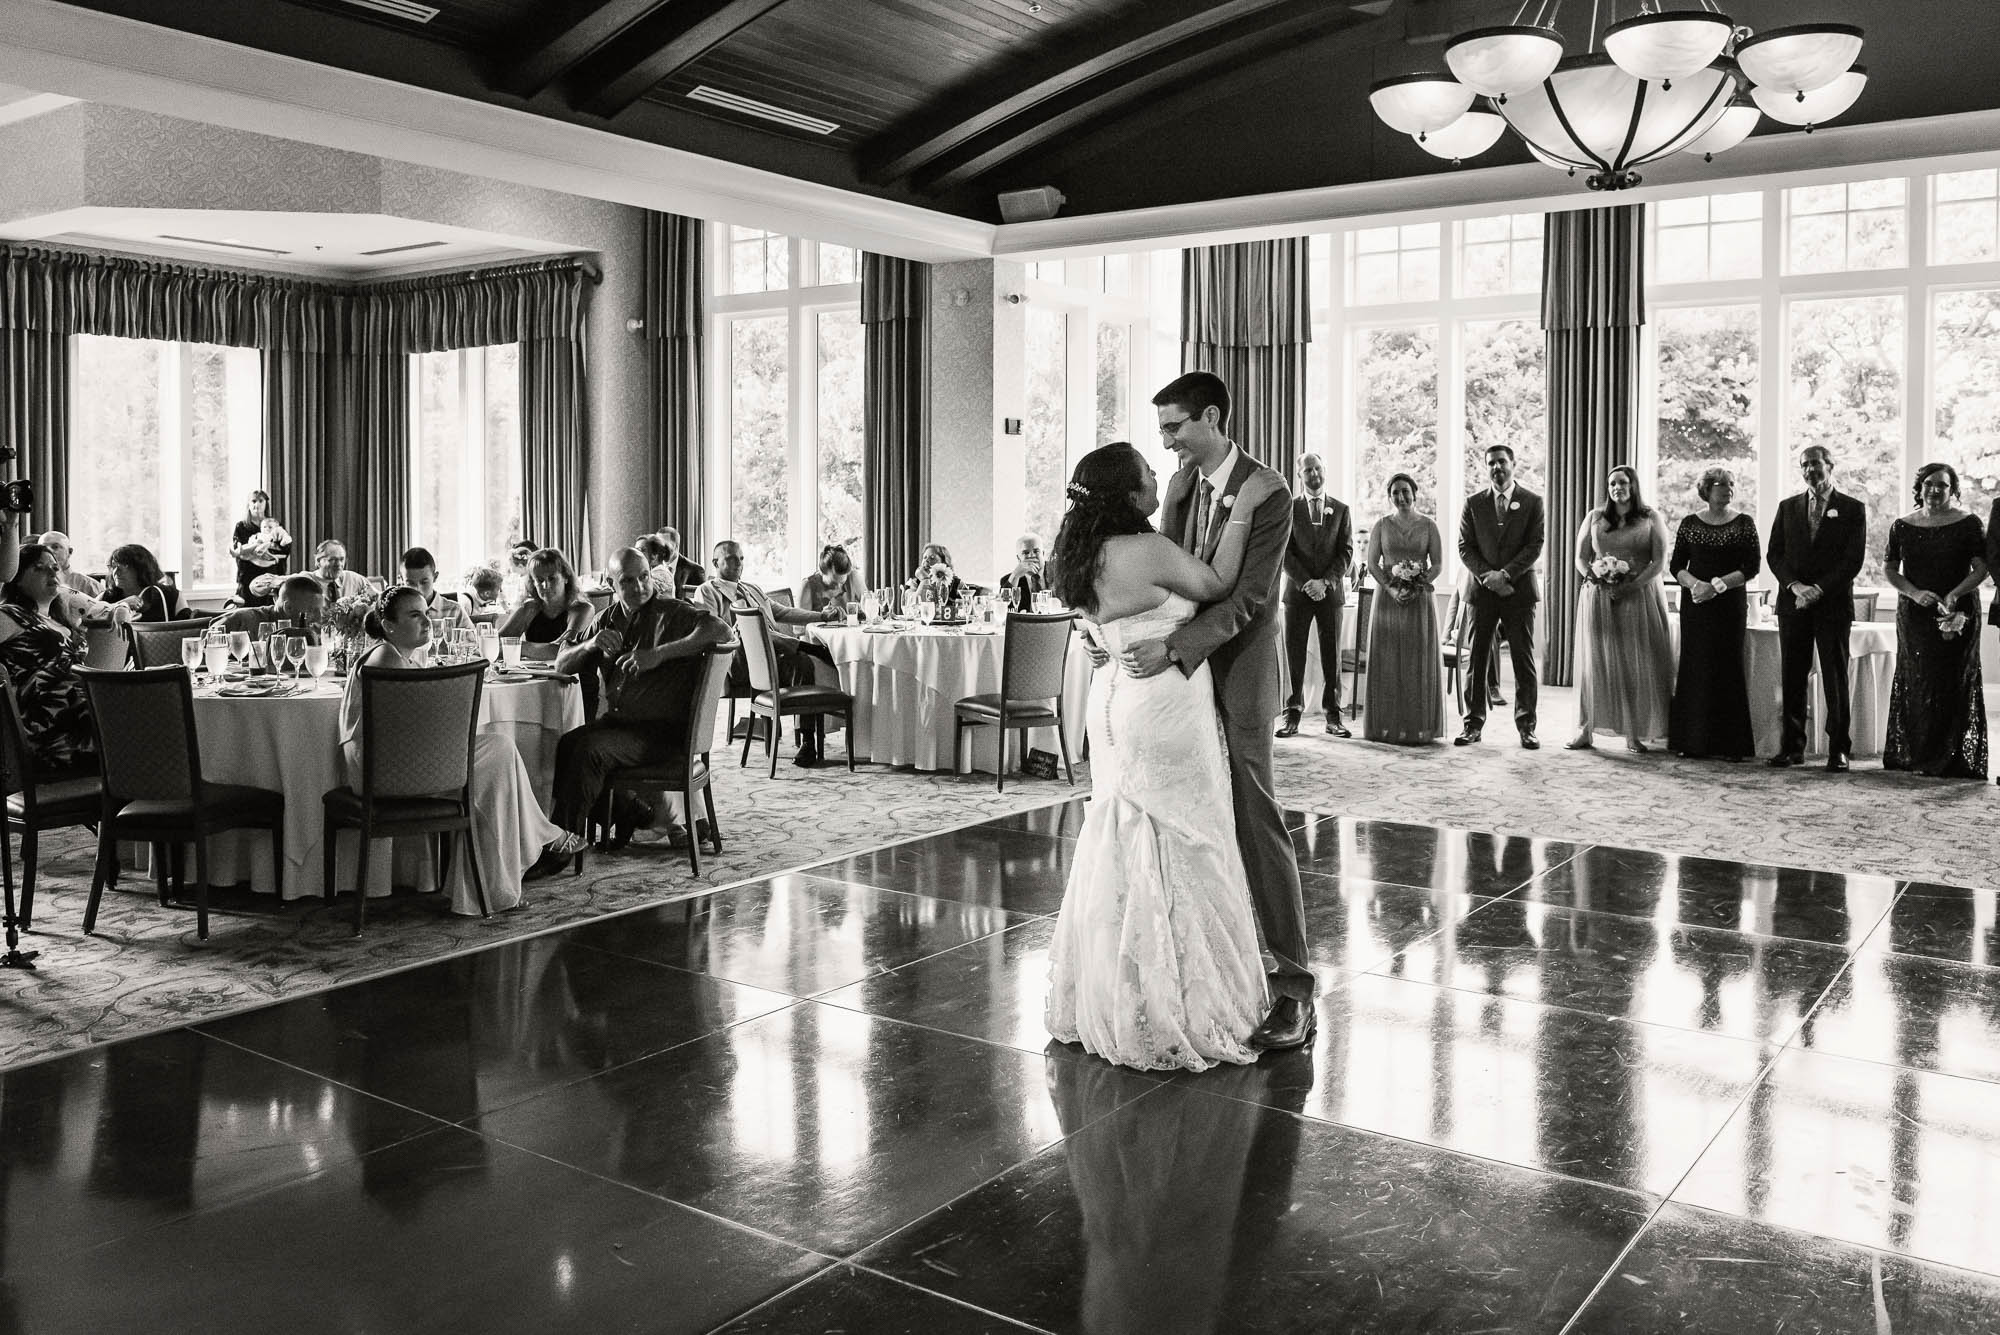 First Dance at Lake of Ilsles